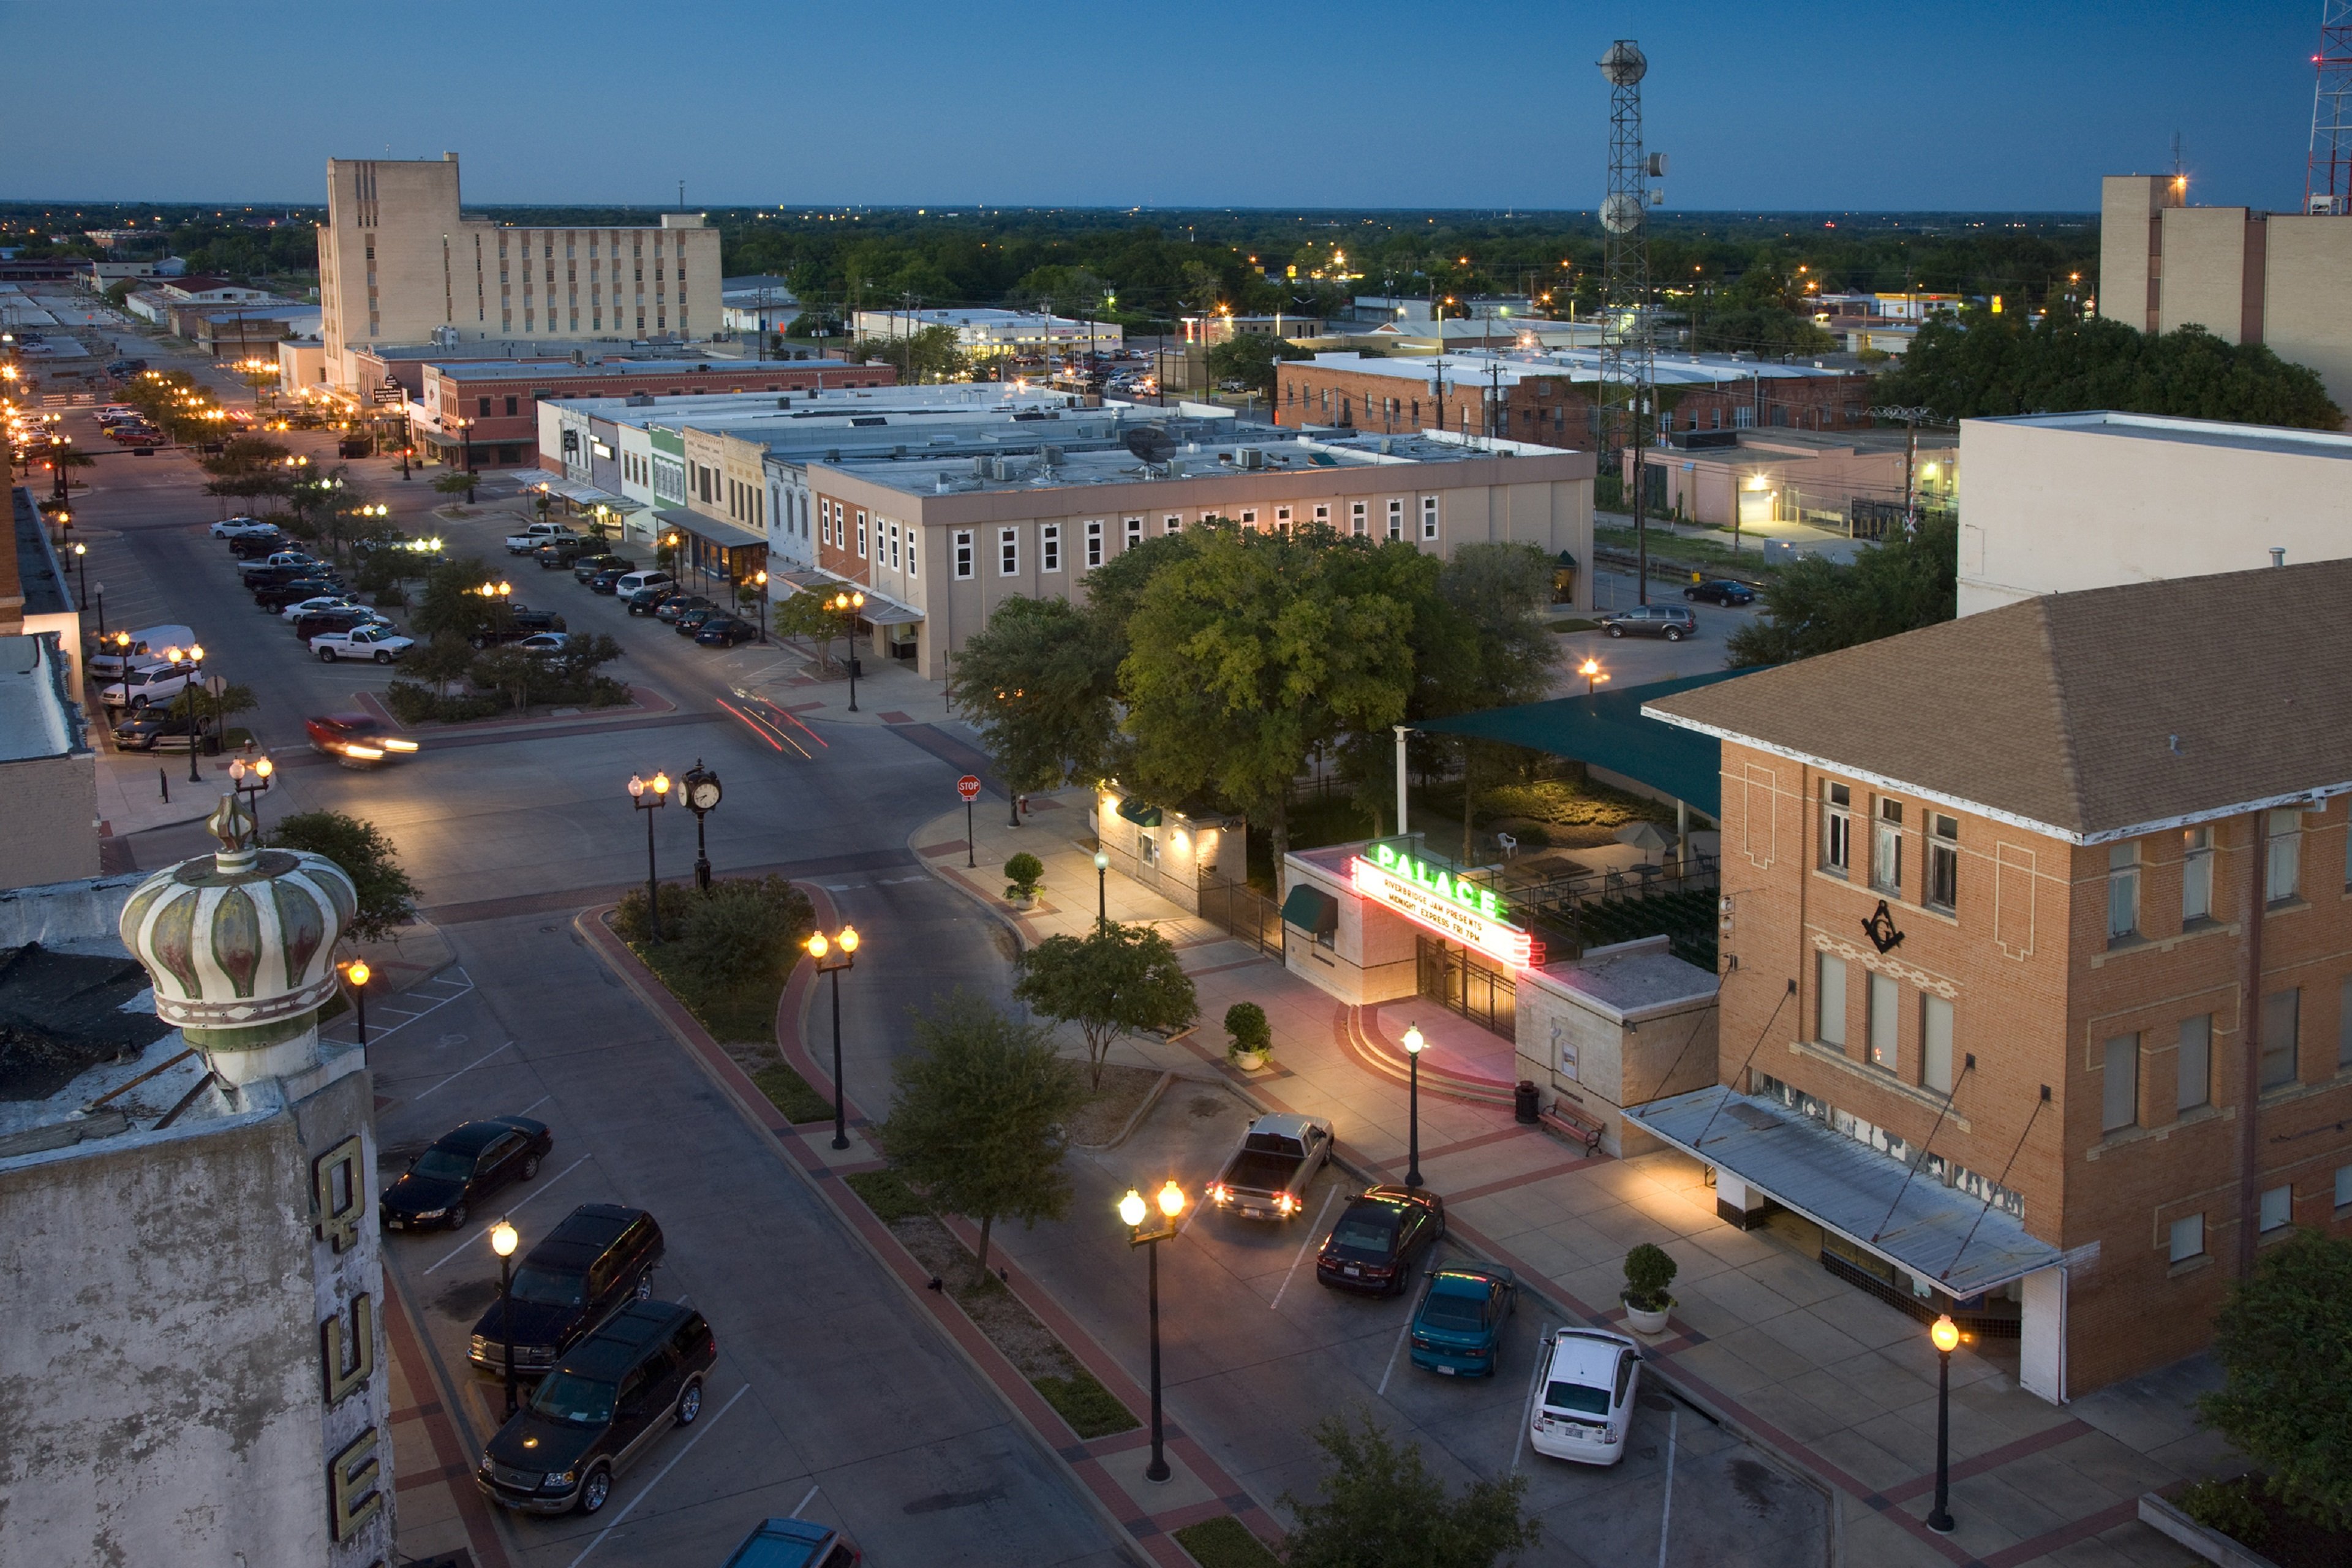  Downtown Bryan -eclectic restaurants, shops, live music and more!